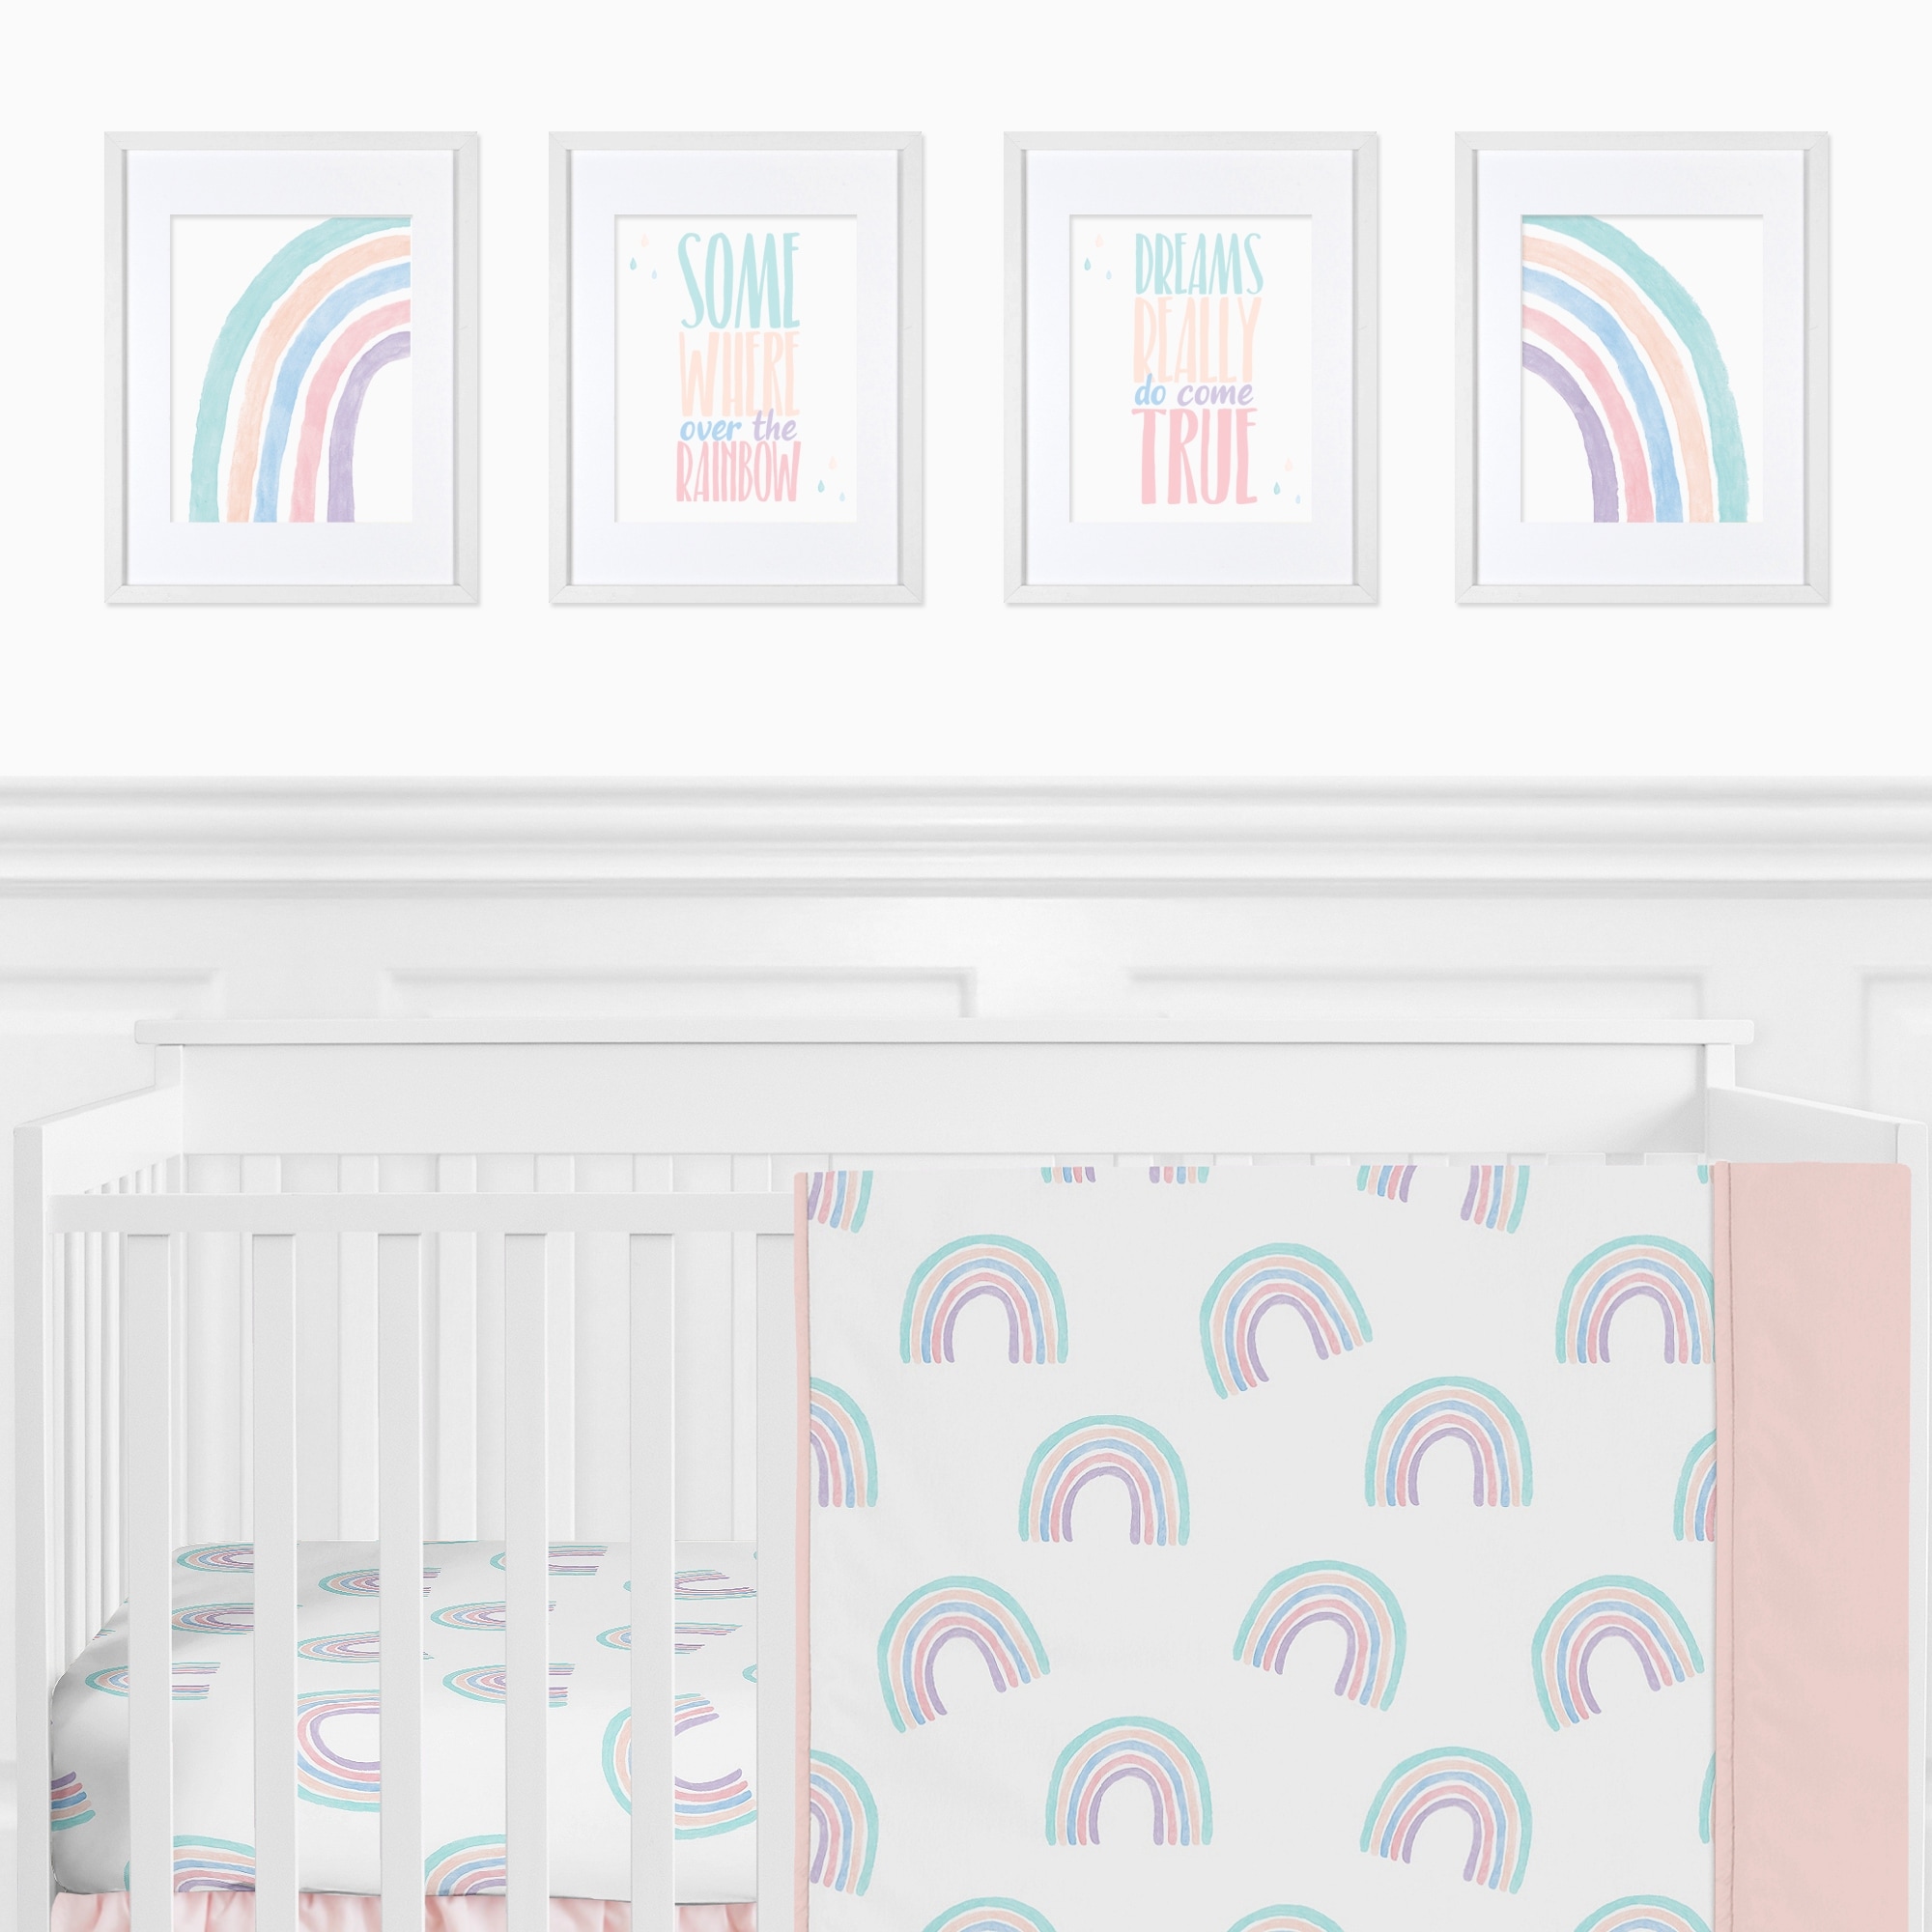 Pastel Rainbow Collection Wall Decor Art Prints (Set of 4) Blush Pink  Purple Teal Blue White Over the Rainbow Bed Bath  Beyond 30648986